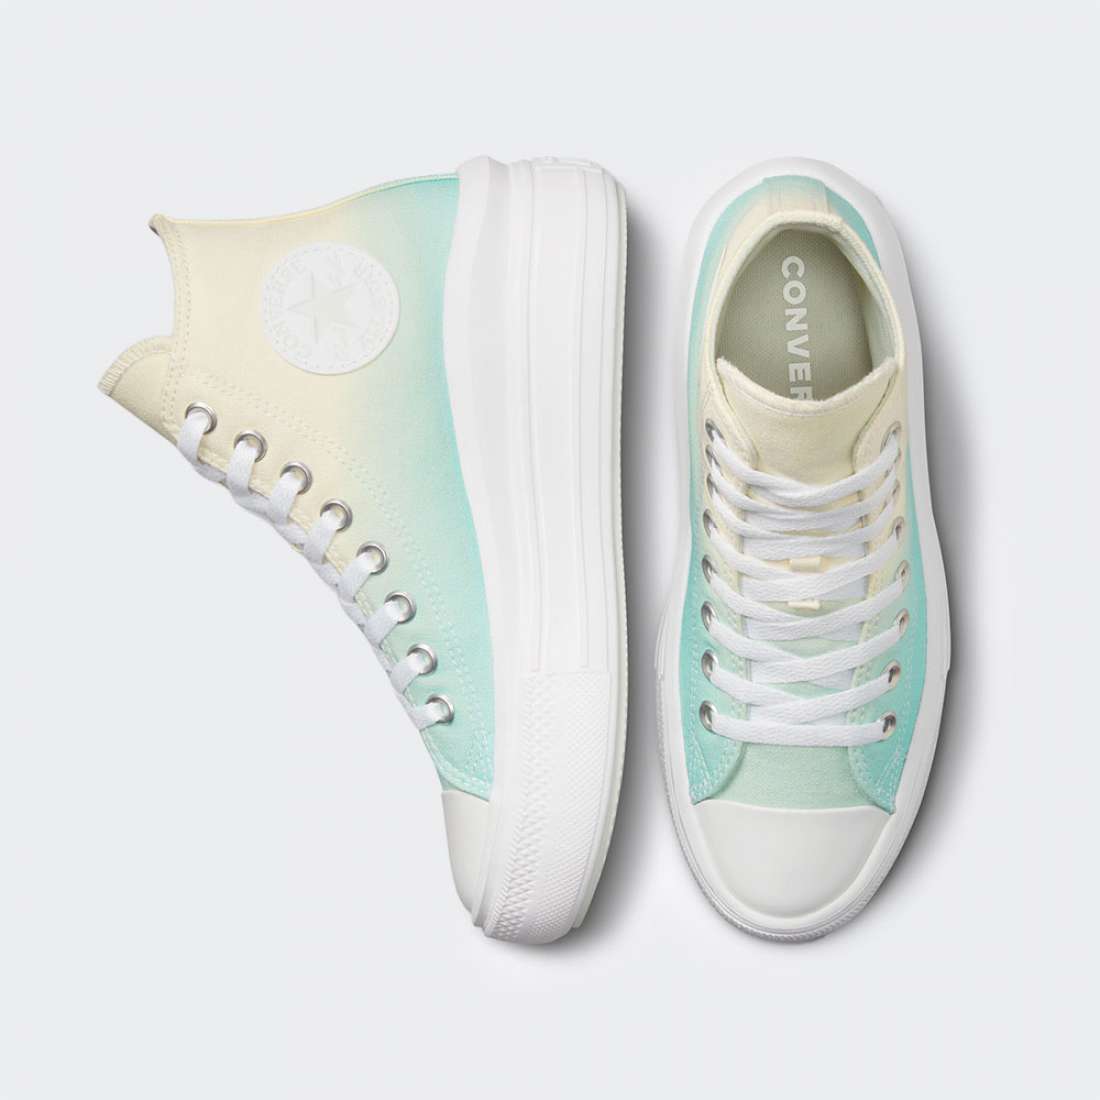 CONVERSE CHUCK TAYLOR ALL STAR HIGH TOP MOVE EGRET/LIGHT DEW/WHITE